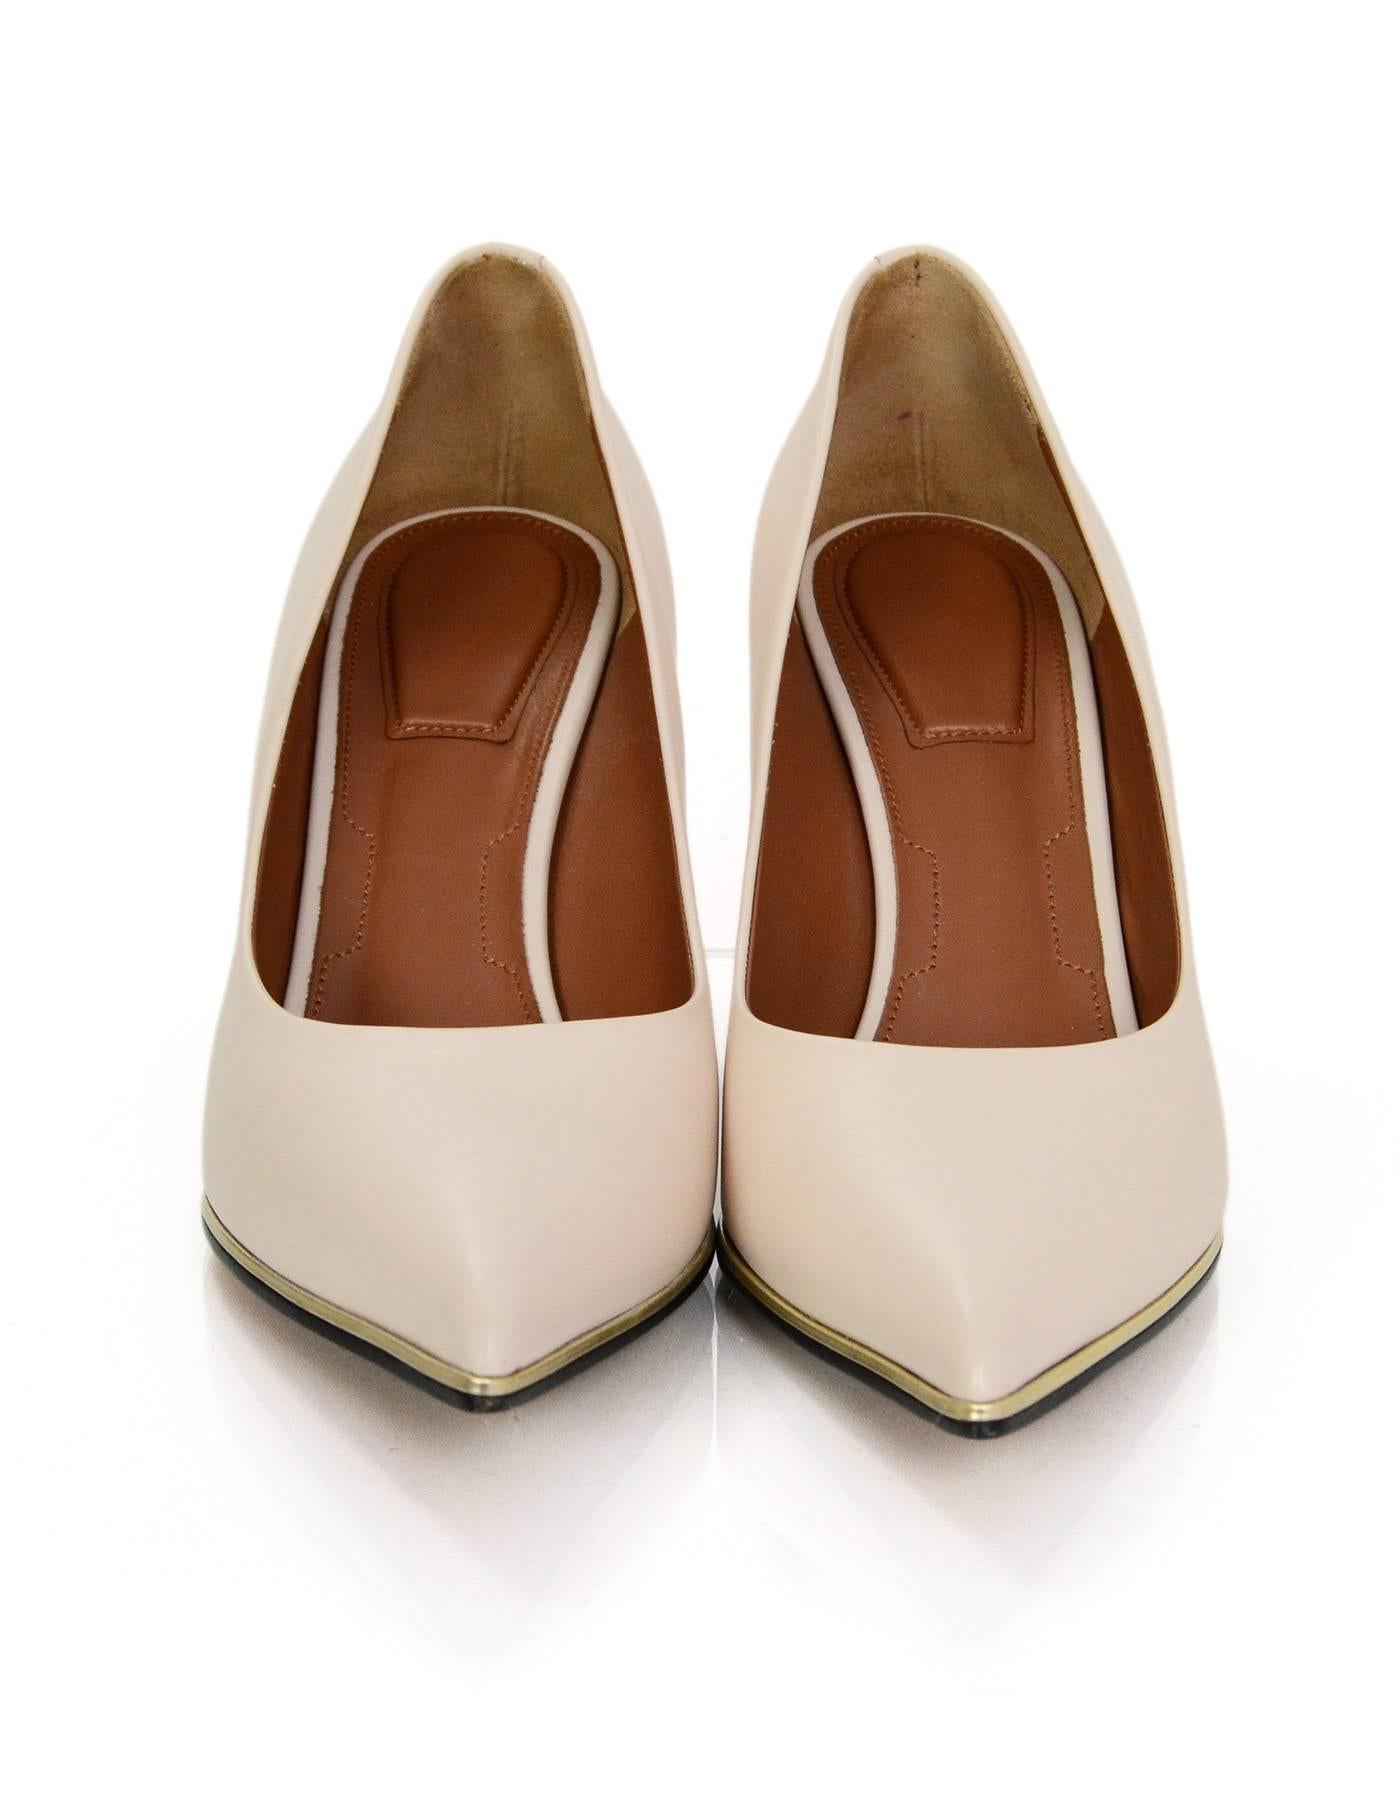 Beige Givenchy Nude Leather Pointed Toe Pumps sz 39 rt. $650